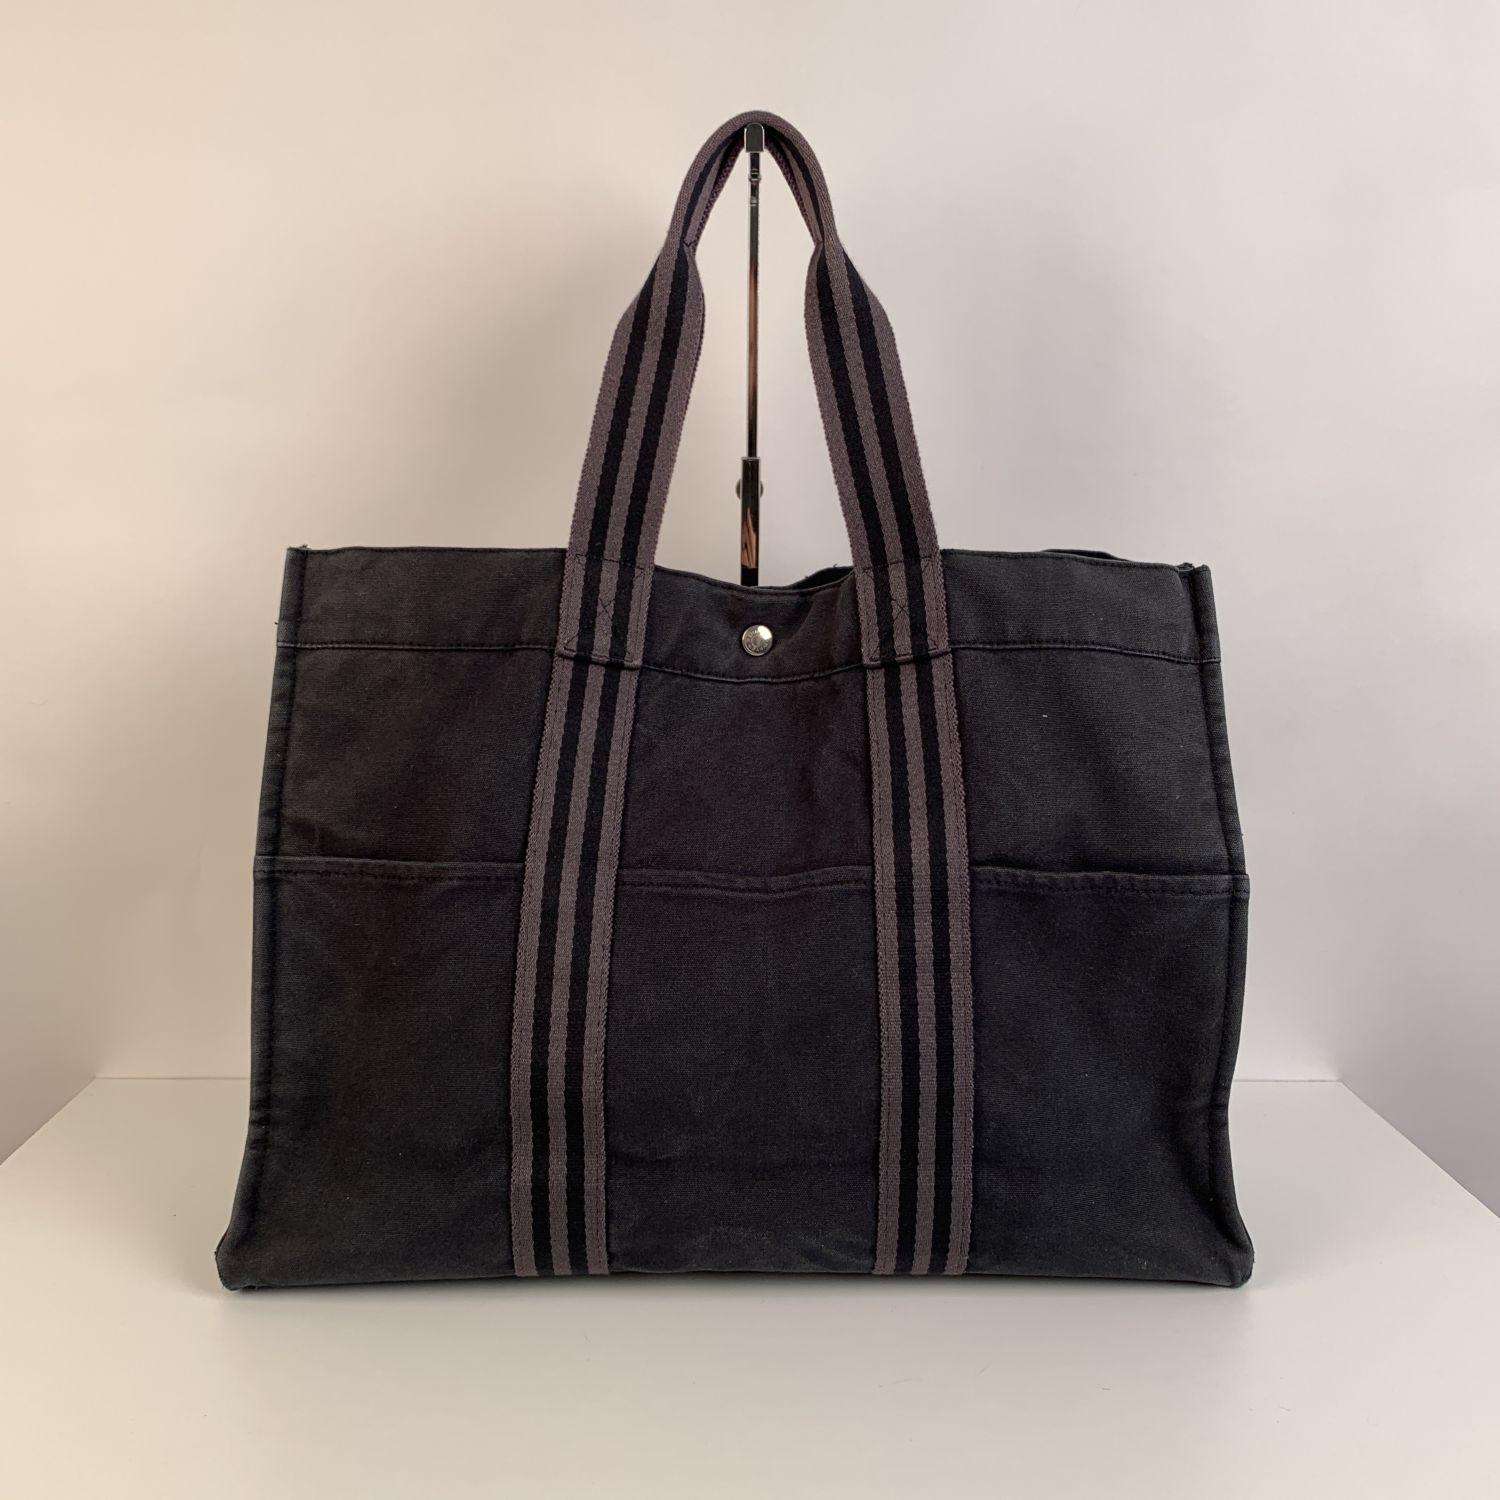 - Hermes Paris Vintage Black Cotton Canvas Tote Handbag Fourre Tout GM
- Made in France
- Black color
- Material: 100% cotton
- 3 front pockets on the front and 3 pockets on the back
- It has snaps on both ends for expansion
- Durable canvas